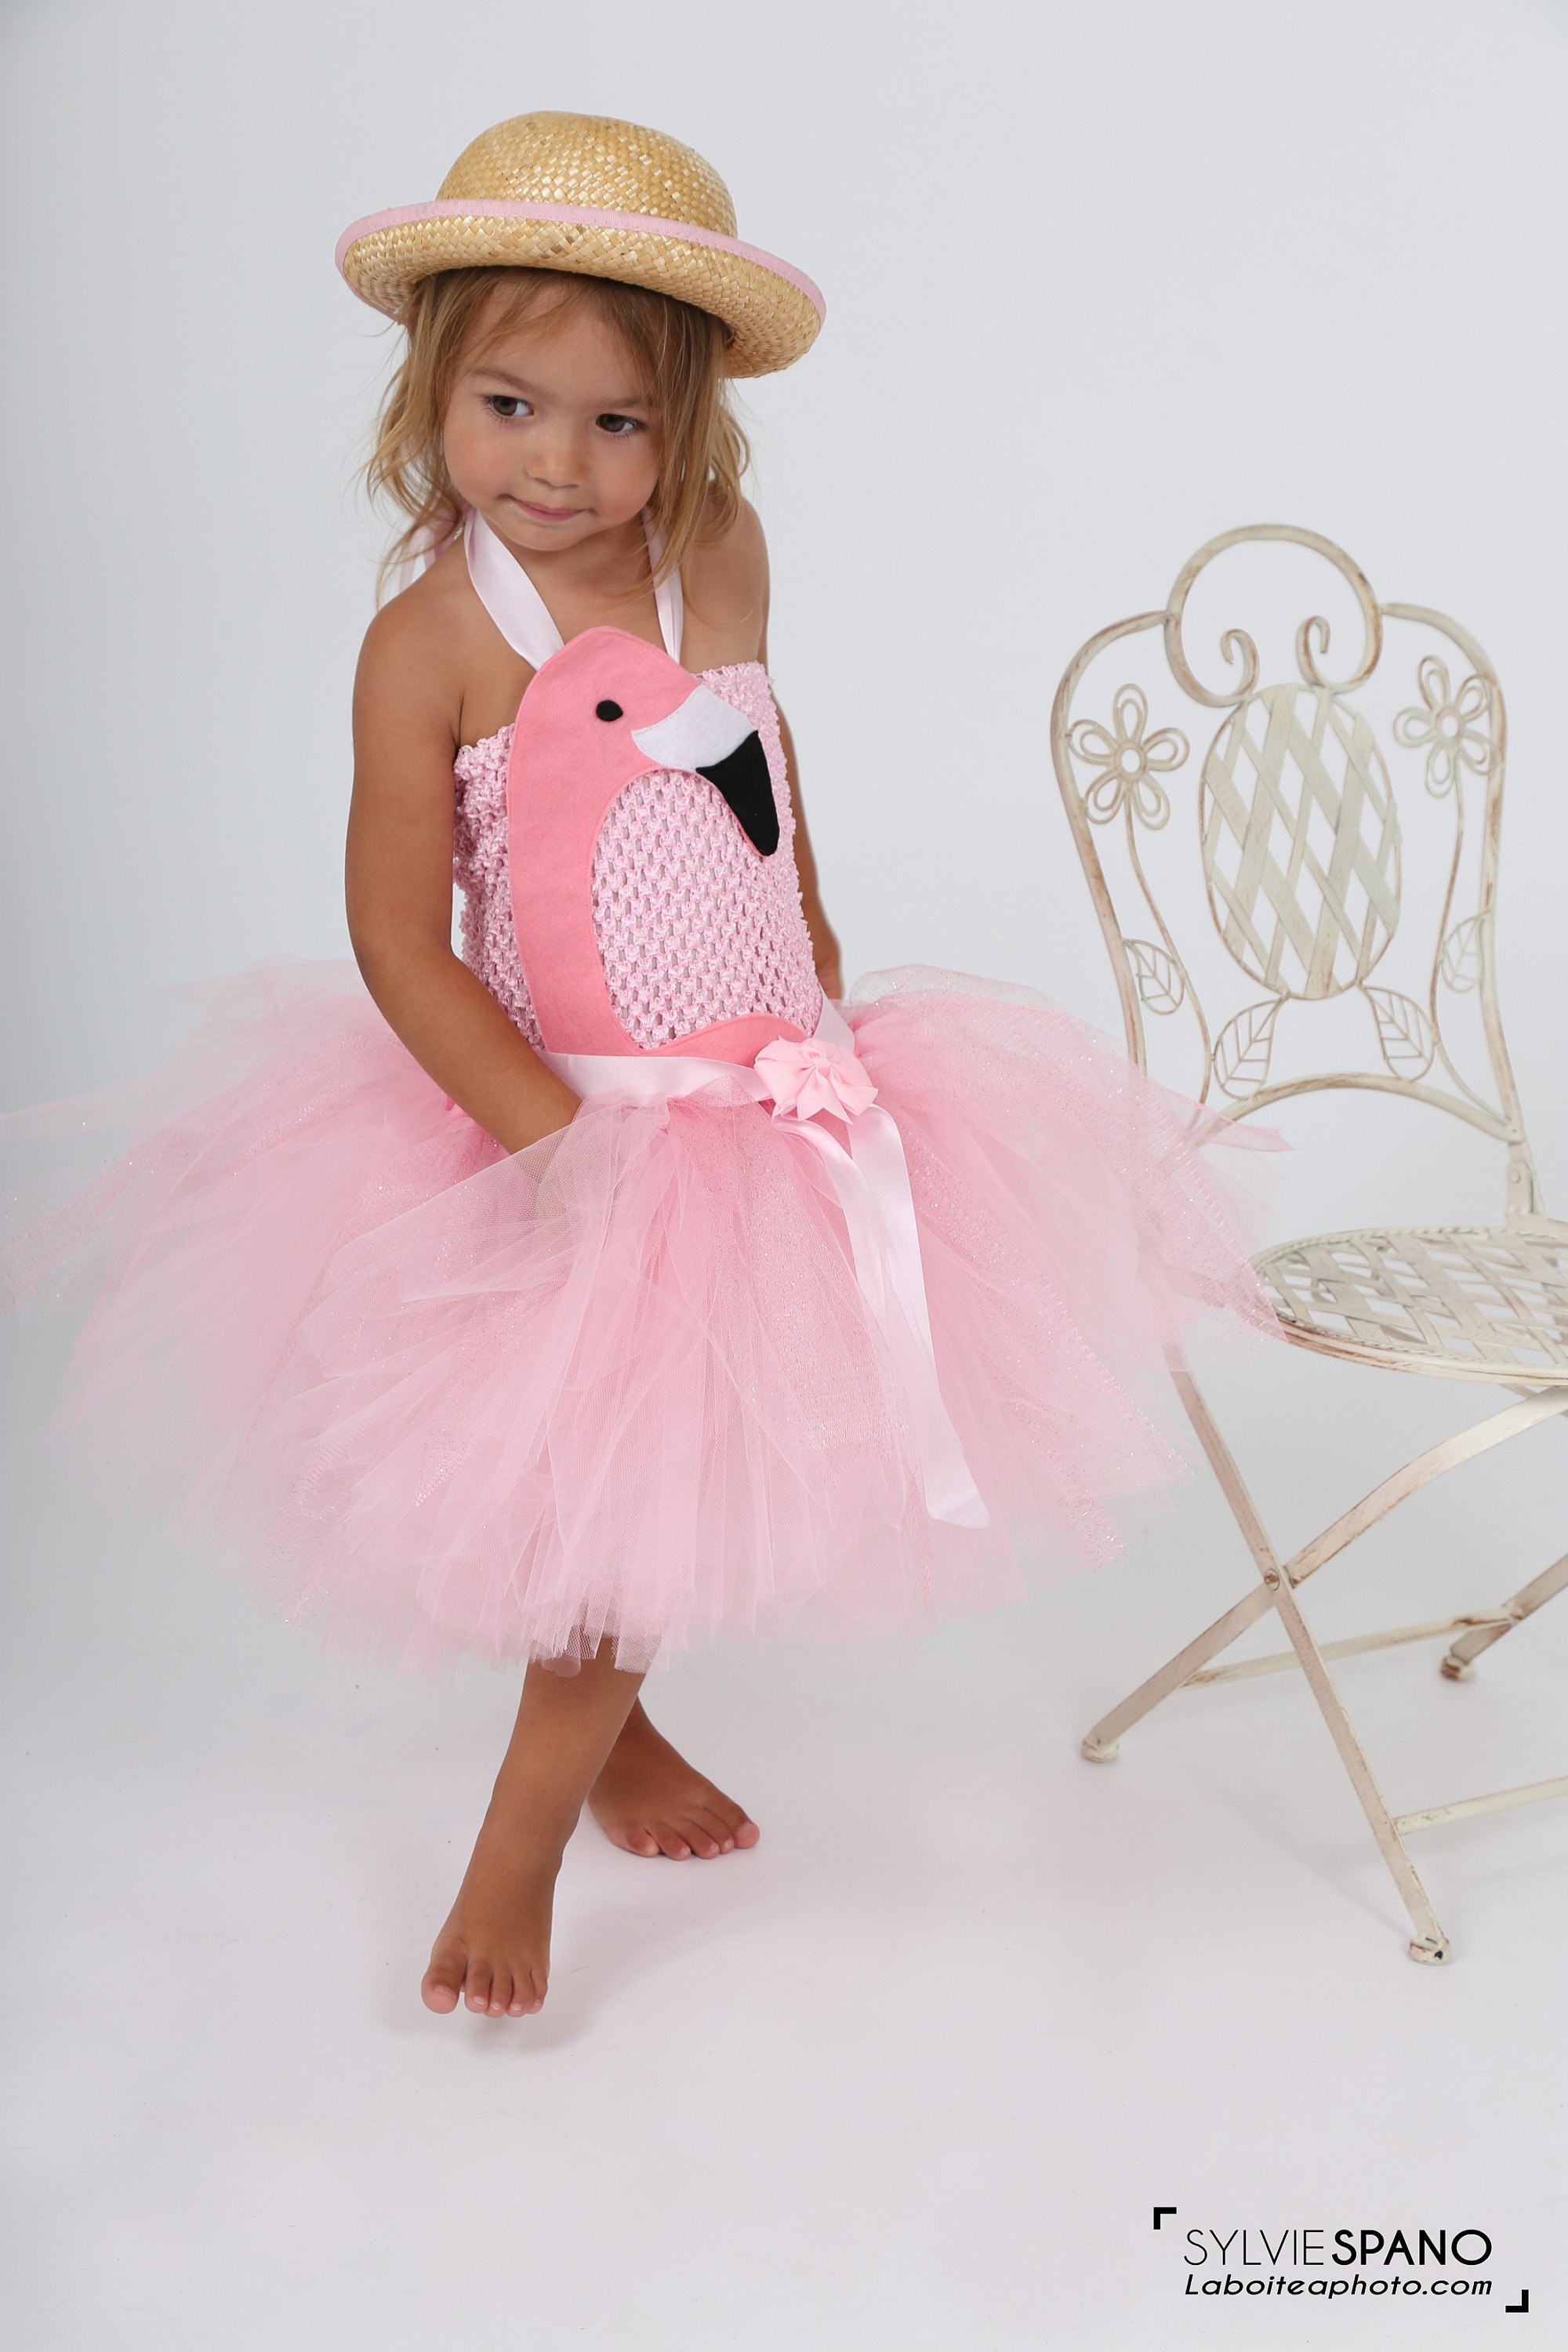 Girl's Flamingo Parachute Dress (Ages: 4, 6, 8, 10, 12) - Peaceful People